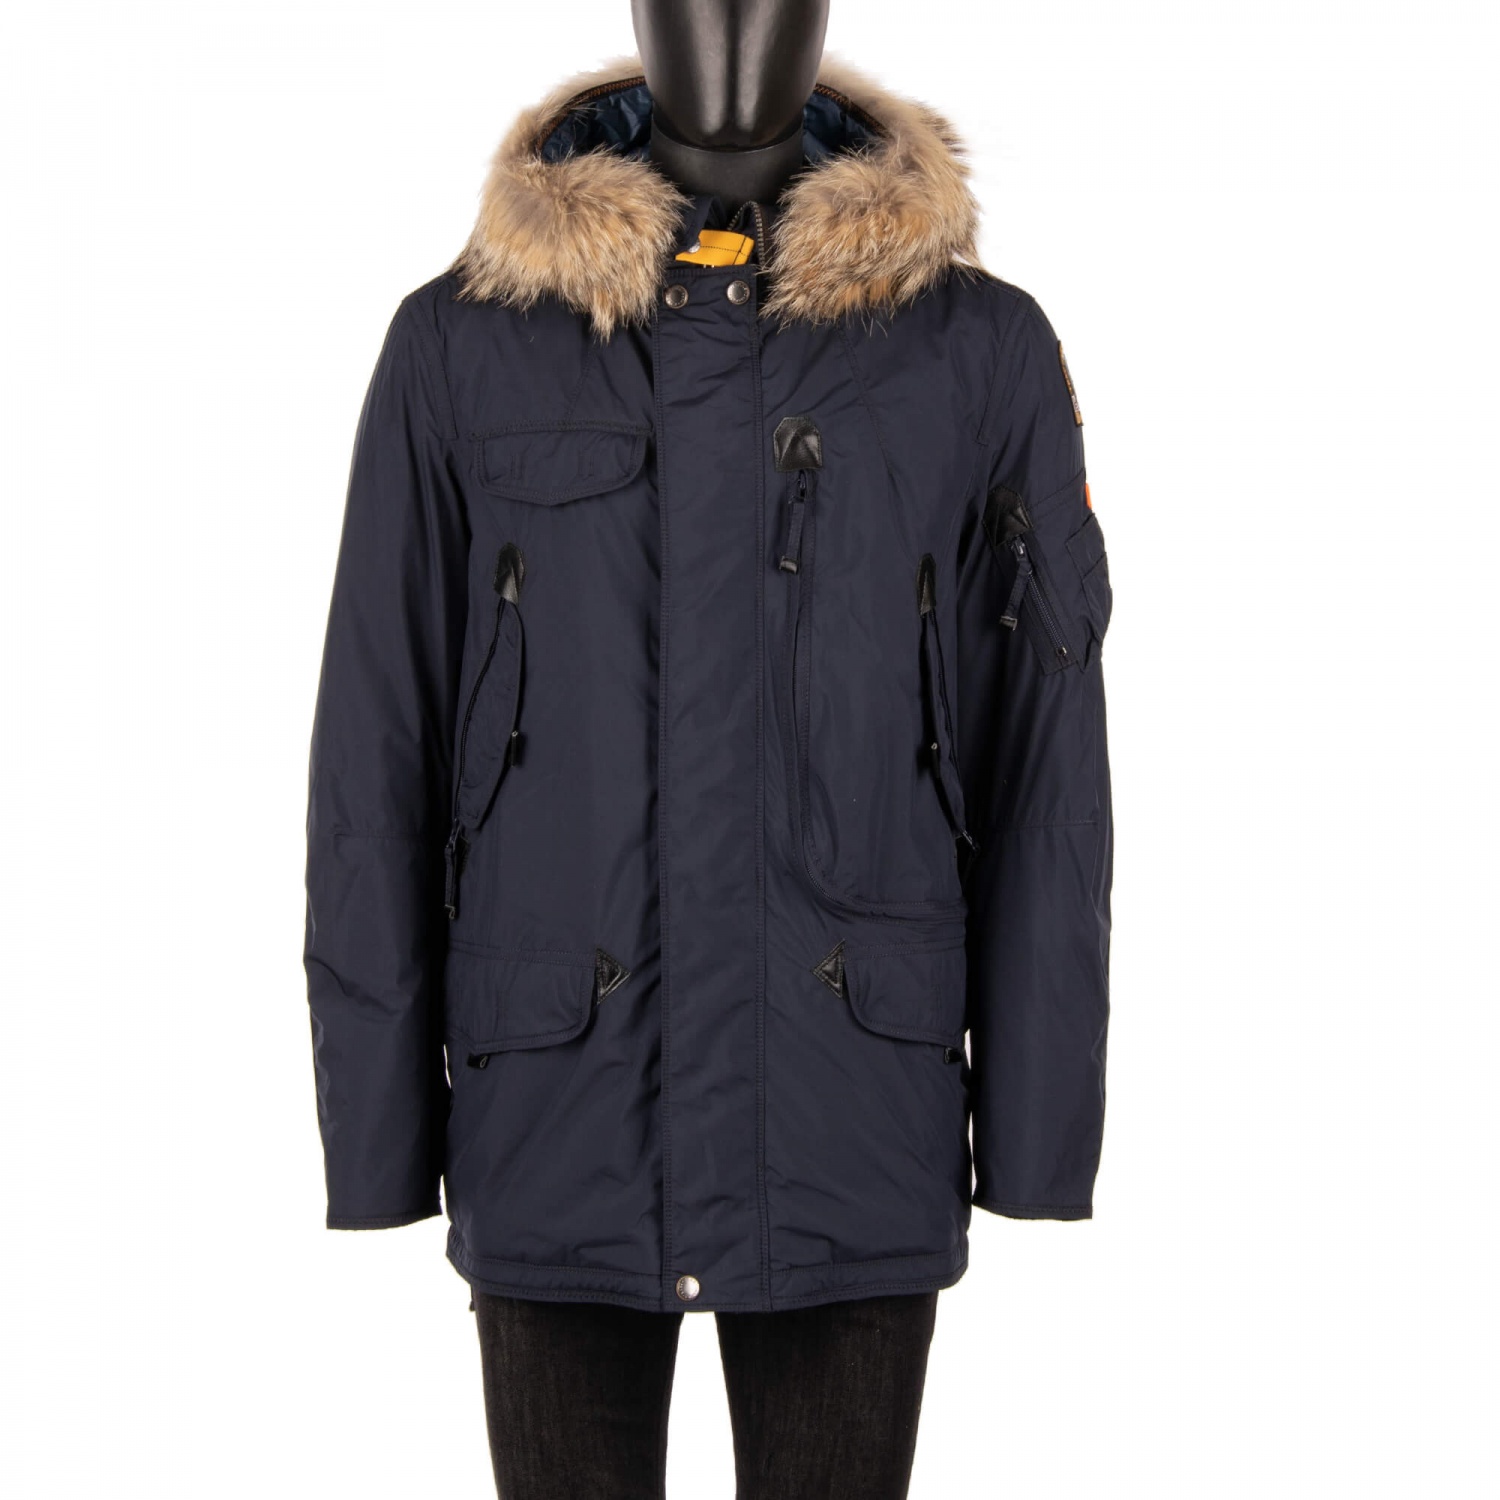 PARAJUMPERS Parka Down Jacket RIGHT HAND LIGHT with Fur Hood Navy Blue ...